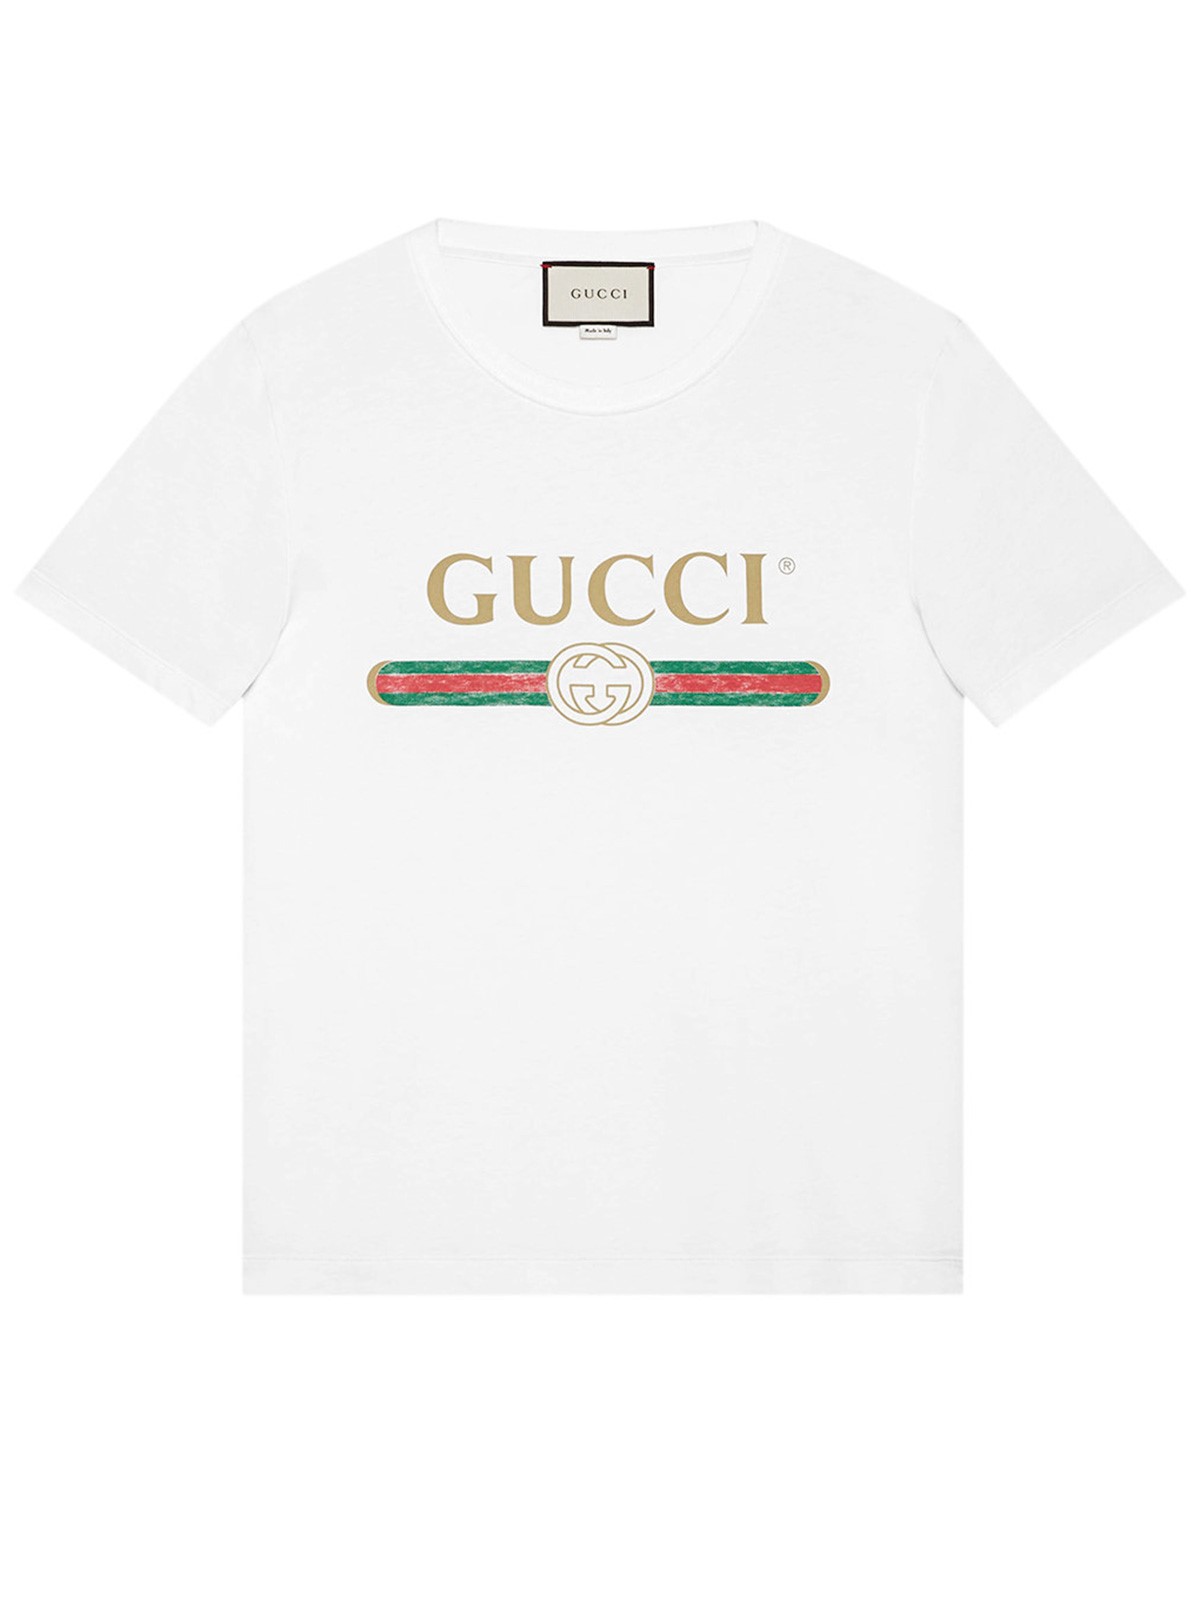 gucci LOGO T-SHIRT available on montiboutique.com - 21997